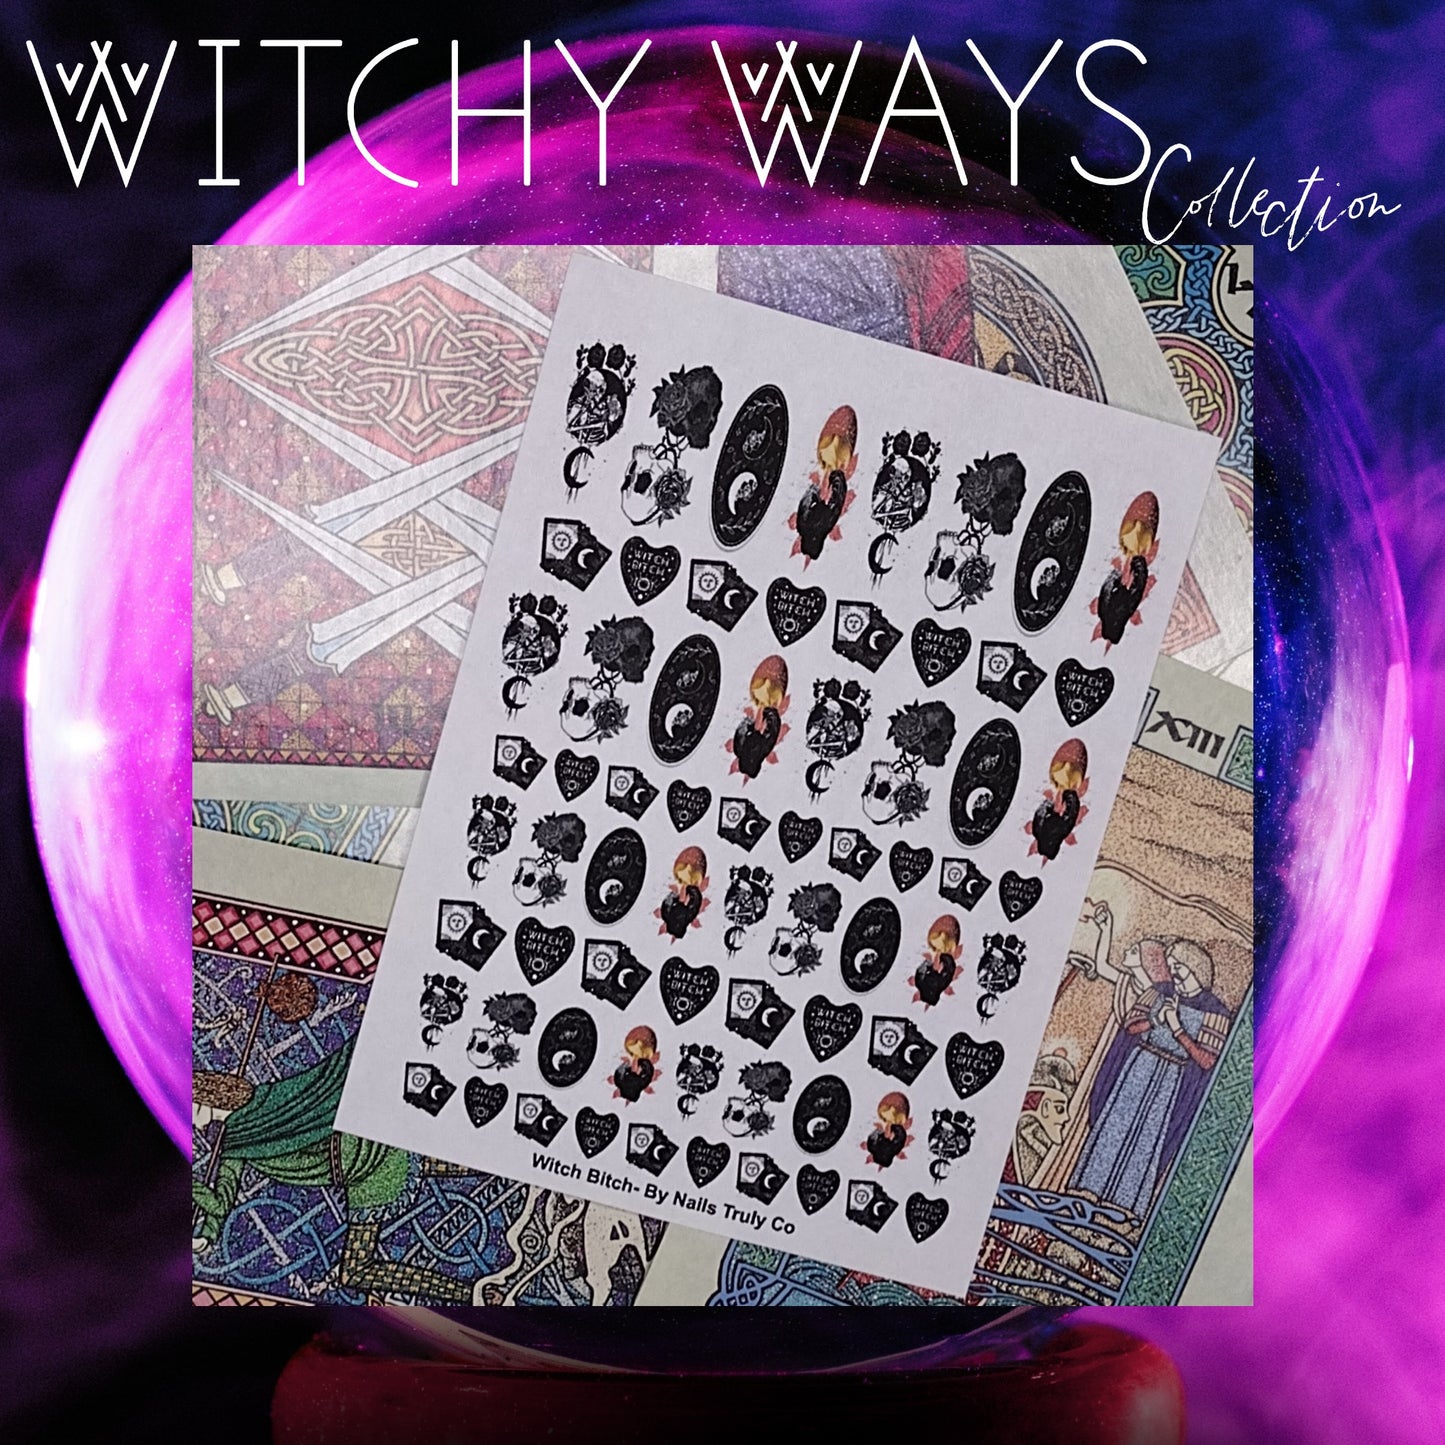 Witchy Nail Art - Witch Bitch